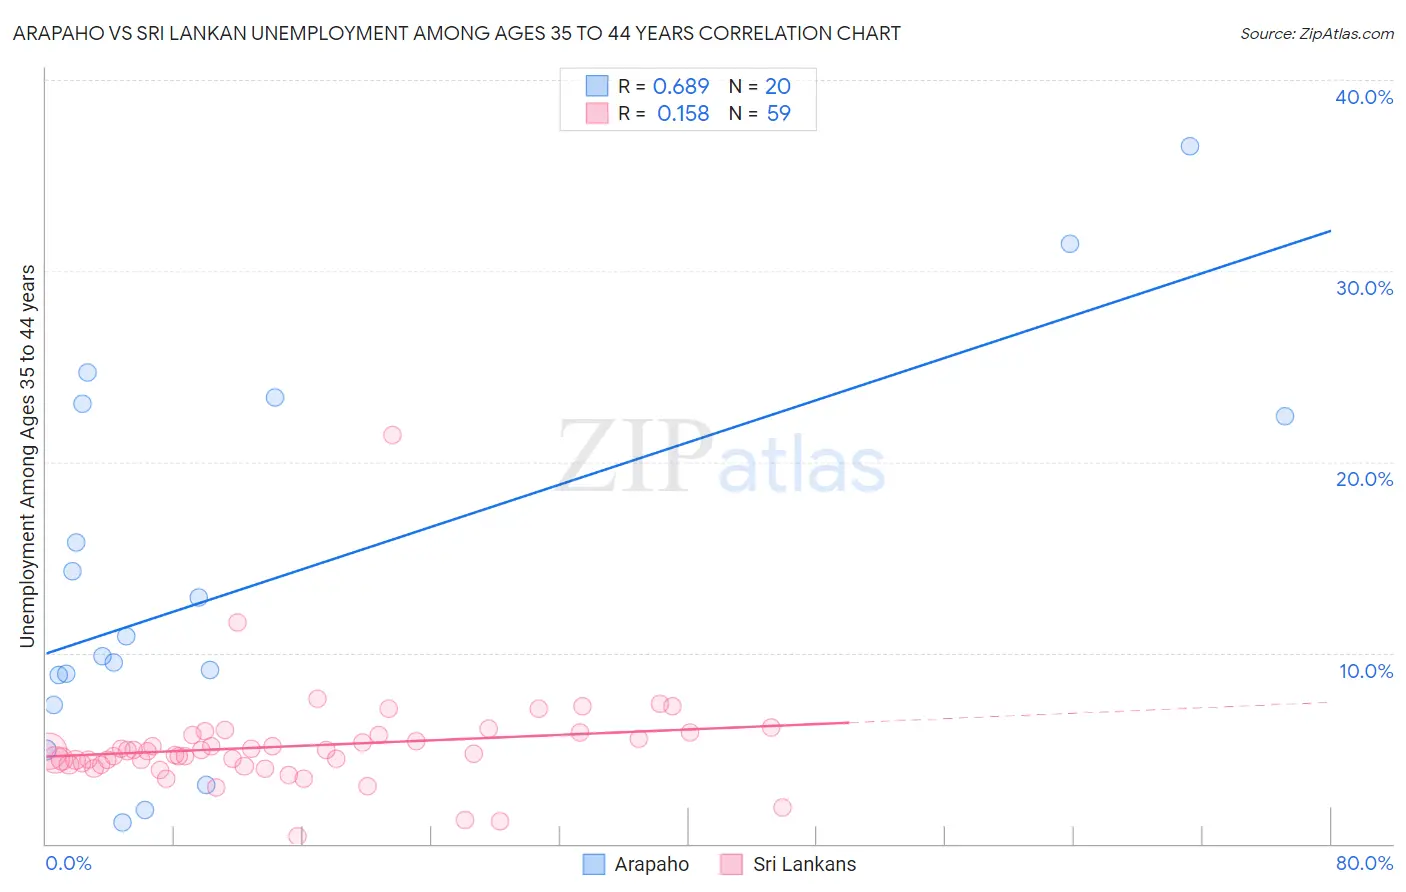 Arapaho vs Sri Lankan Unemployment Among Ages 35 to 44 years